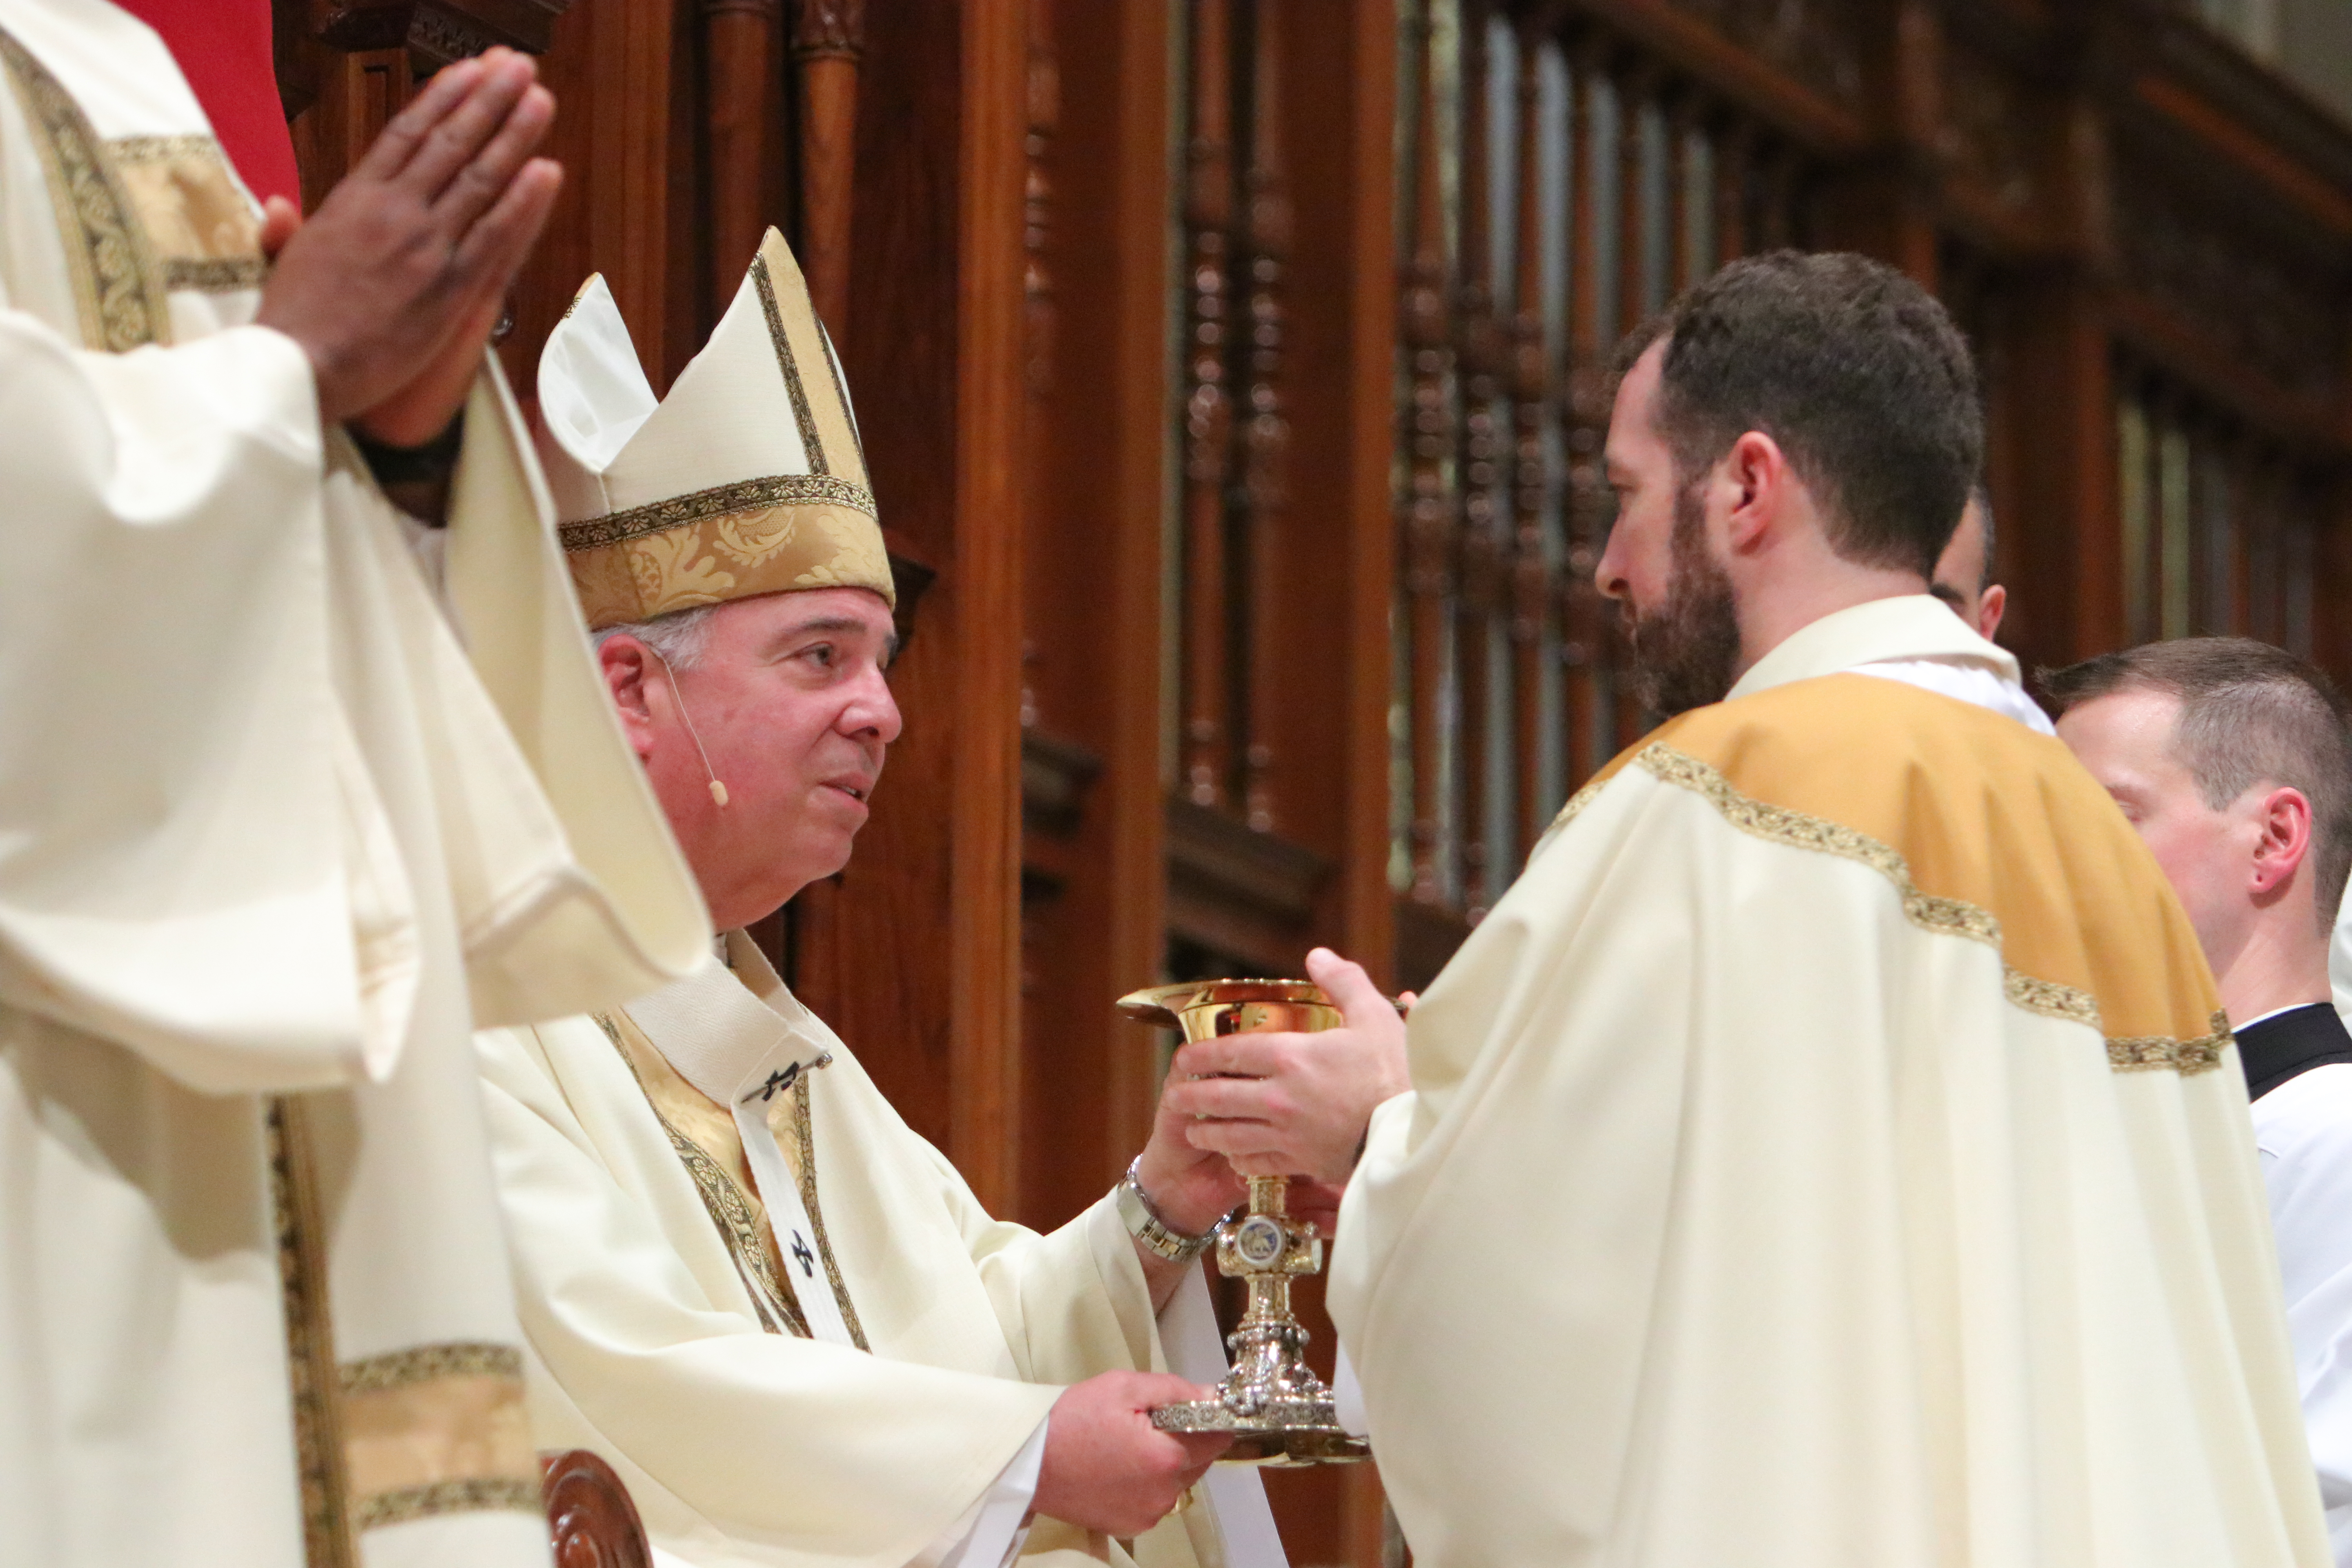 Father Henry Graebe receives the chalice and paten